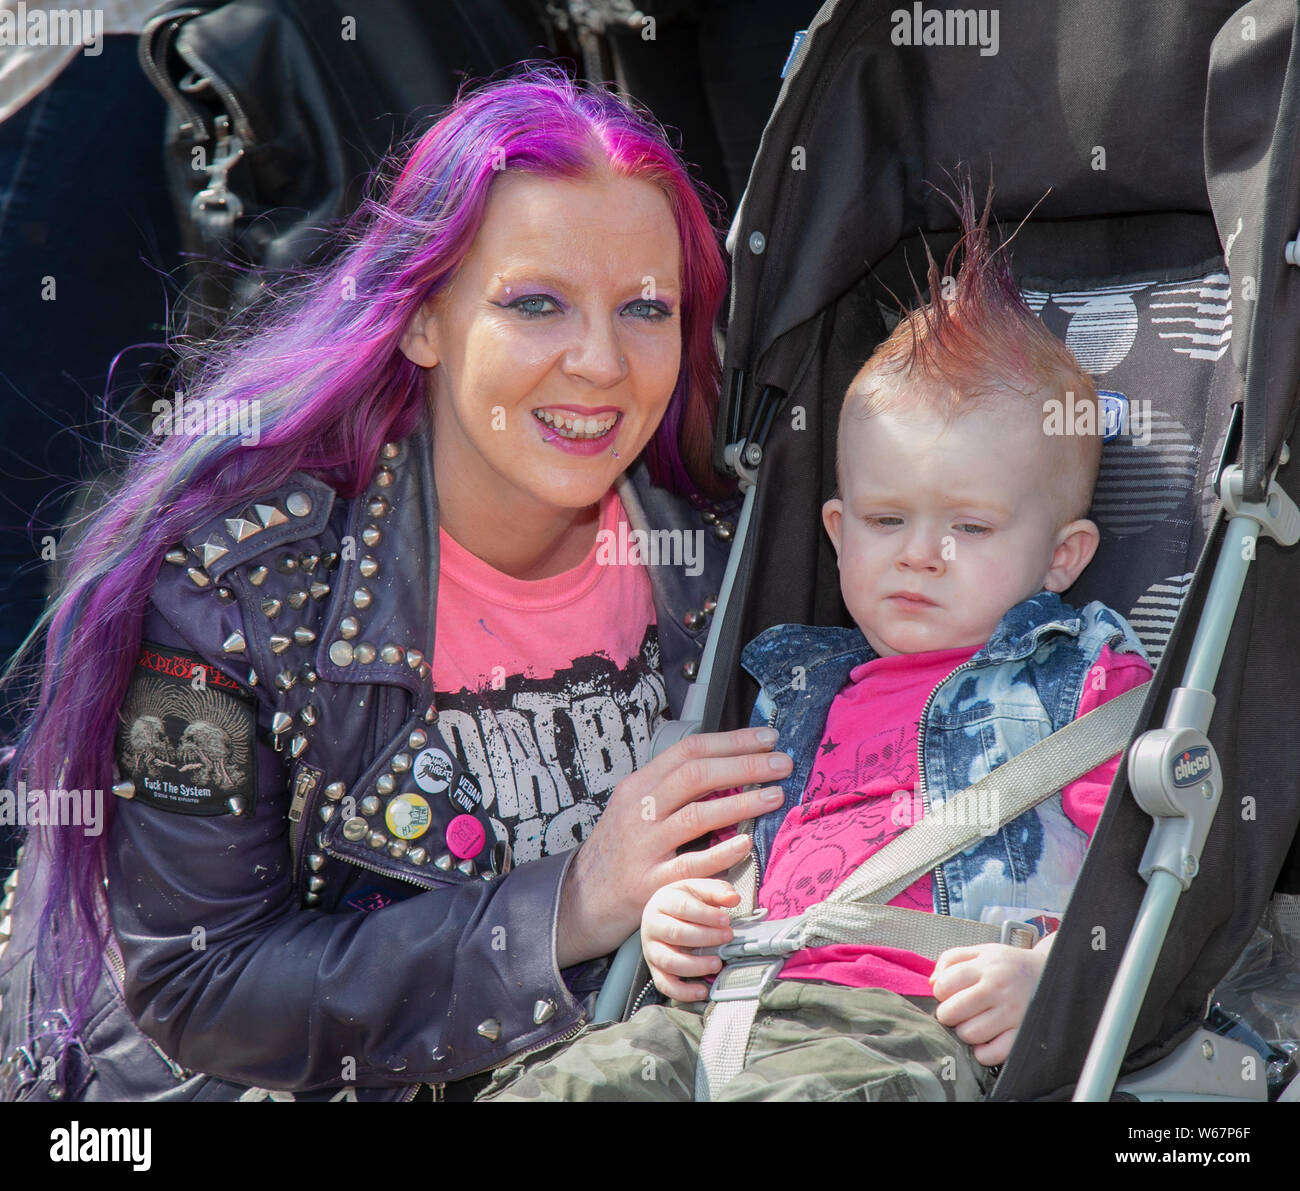 Blackpool, Lancashire, UK. 31st July, 2019.  Kingsley Phoenix 2 years old and May Kiely at the Rebellion Festival the world's largest punk festival in Blackpool. At the beginning of August, Blackpool’s Winter Gardens plays host to a massive line up of punk bands for the 21st edition of Rebellion Festival attracting thousands of tourists to the resort.  Over 4 days every August in Blackpool, the very best in Punk gather for this social event of the year with 4 days of music across 6 stages with masses of bands. Credit; MediaWorldImages/Alamy Live News Stock Photo